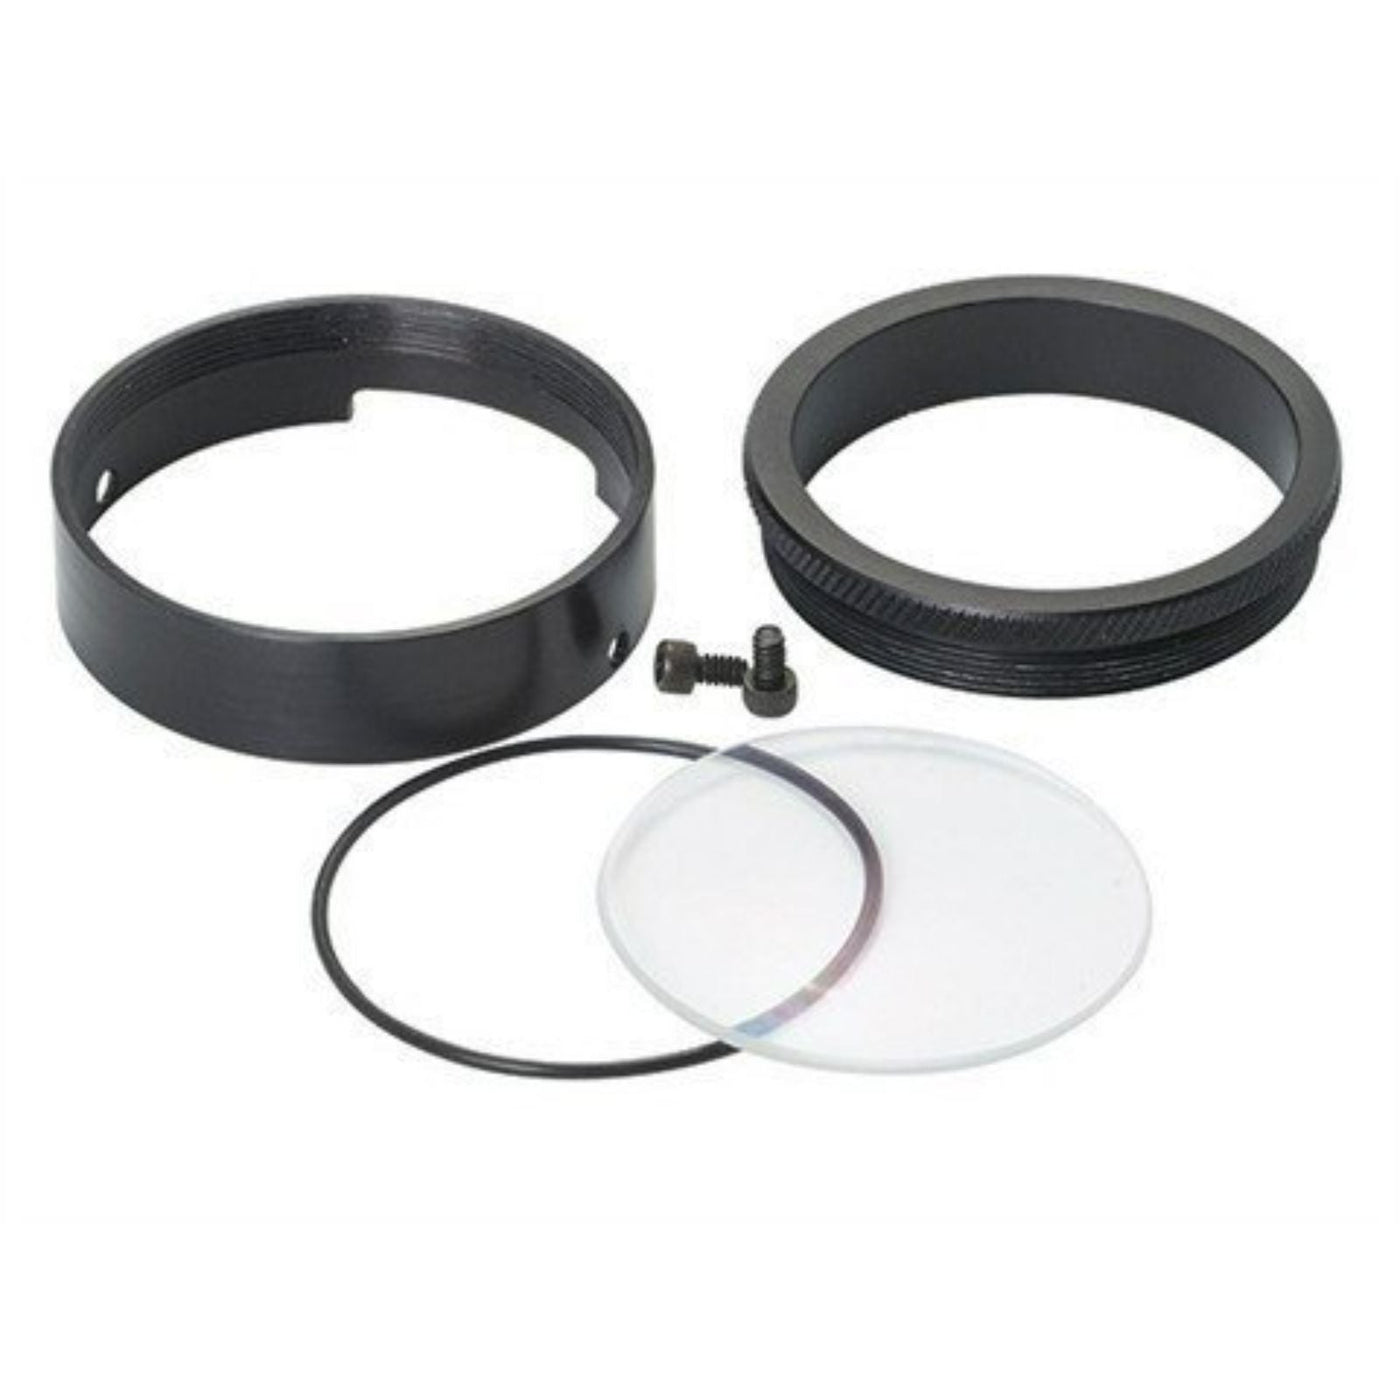 HHA HHA 4 Power Lens Kit For in Sight Housings 2 inch Archery